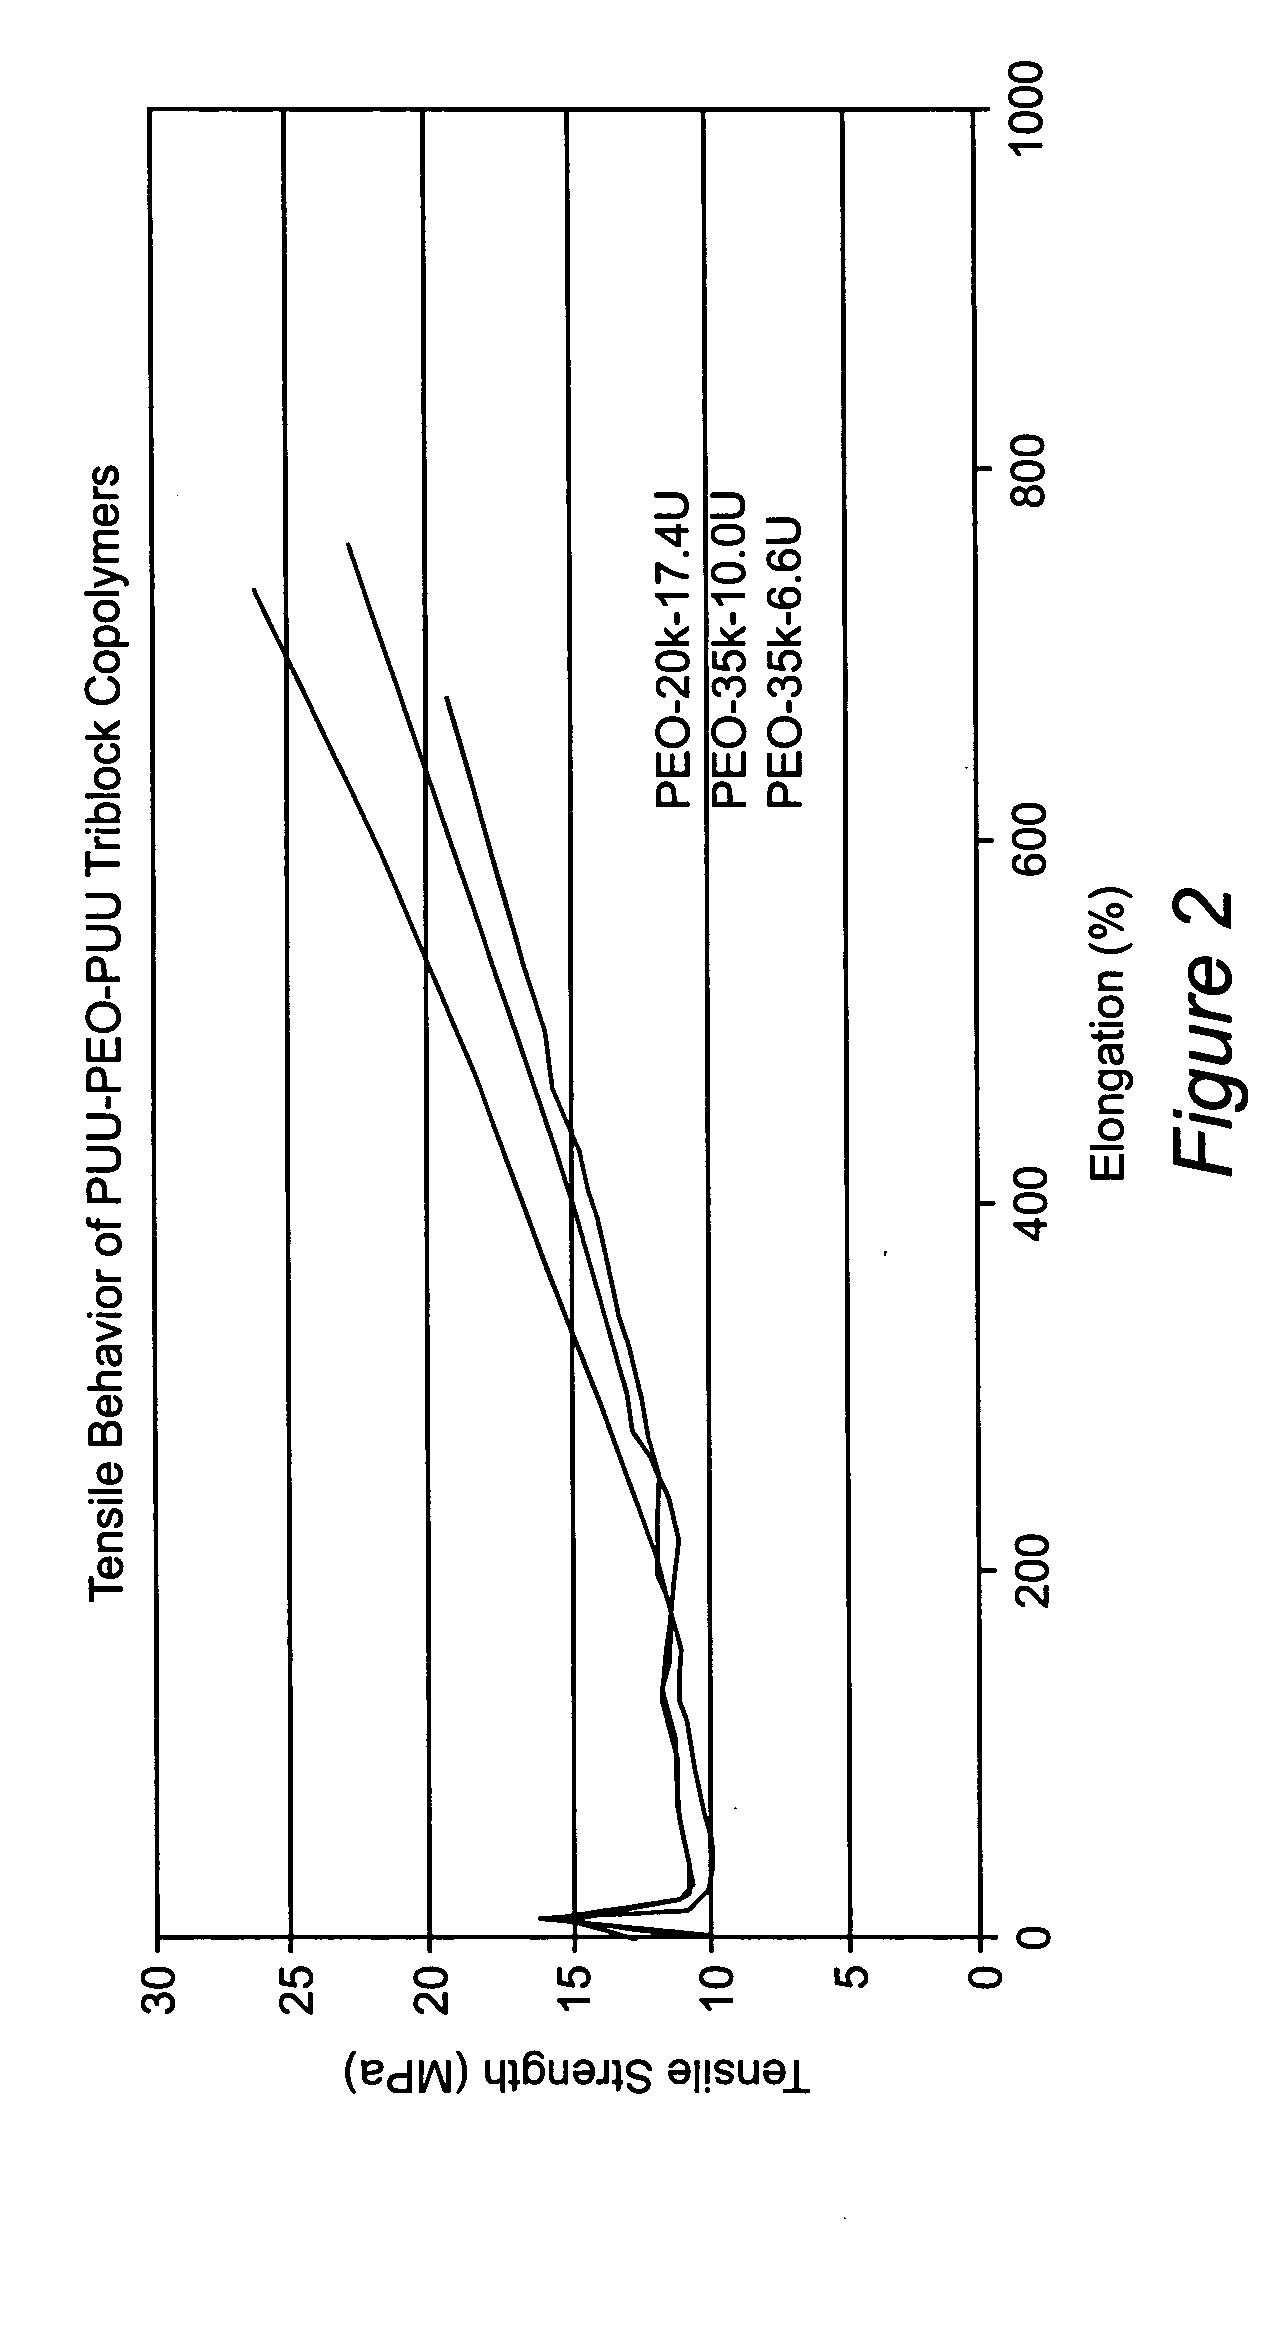 Triblock copolymers and their production methods